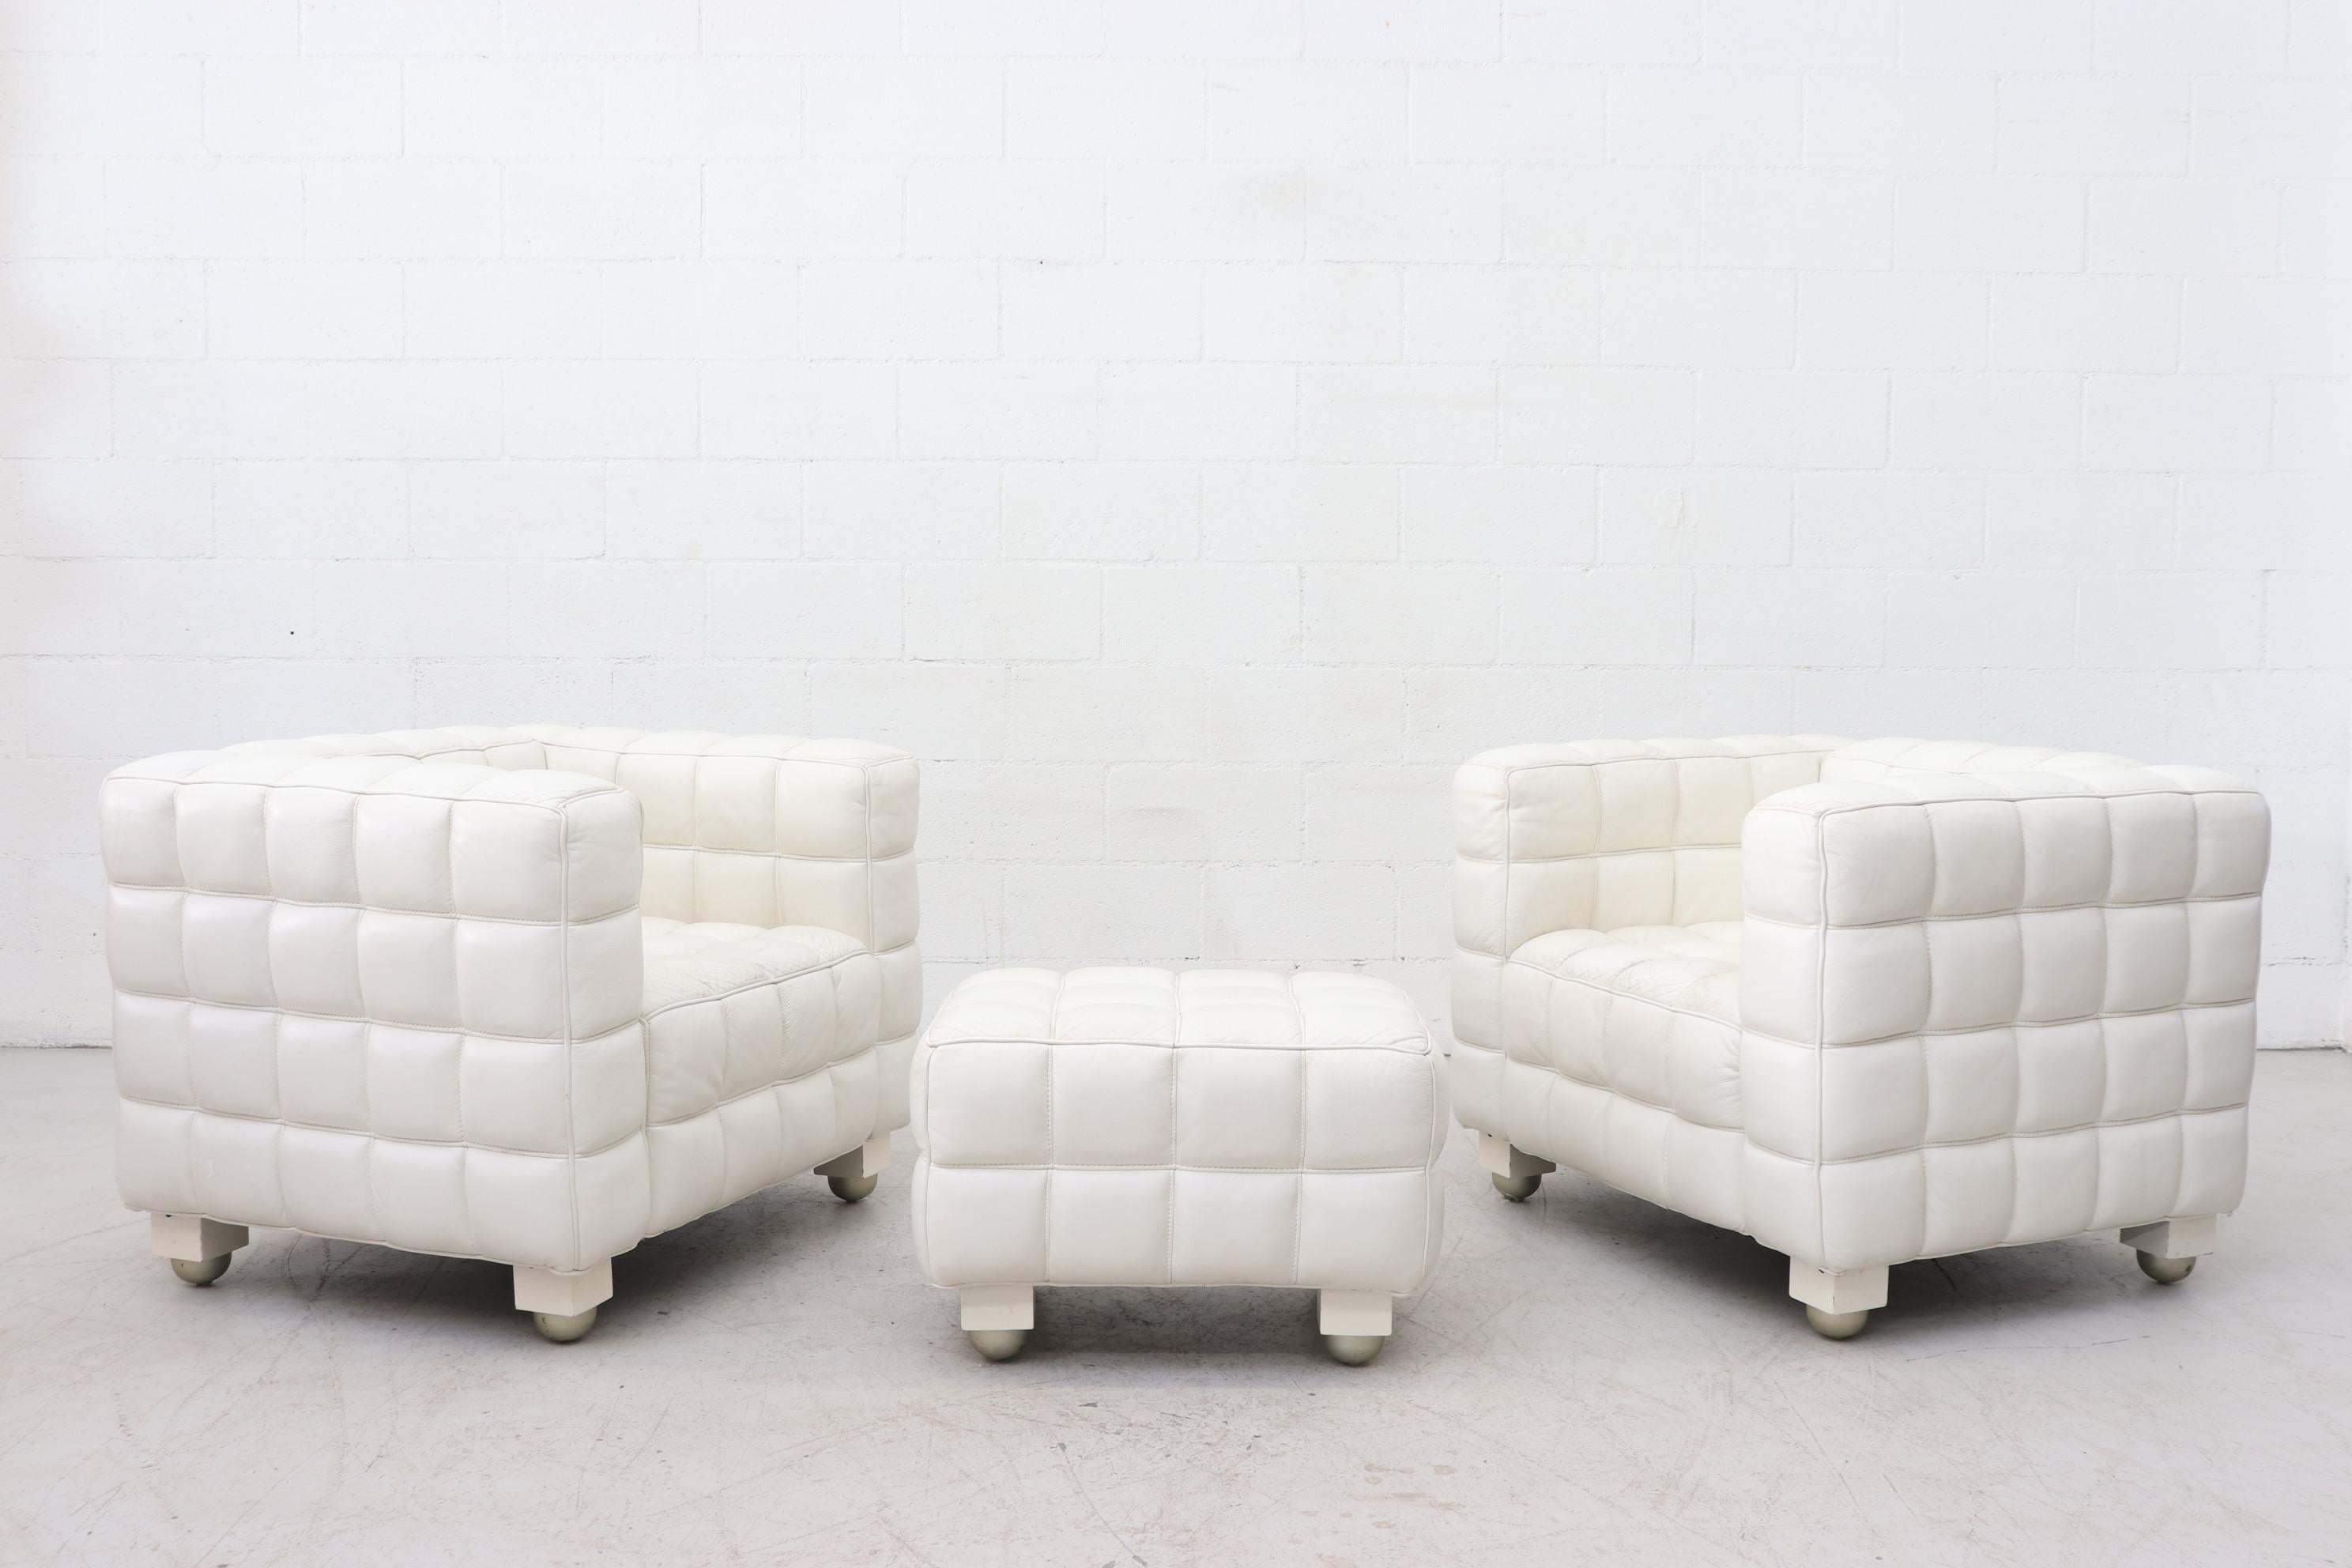 Pair of white leather Josef Hoffman Kubus style lounge chairs with ottoman. Mod quilted leather cube lounge chairs with strong lines on short wooden legs and silver ball feet. In original condition with visible wear, as pictured. Set price.